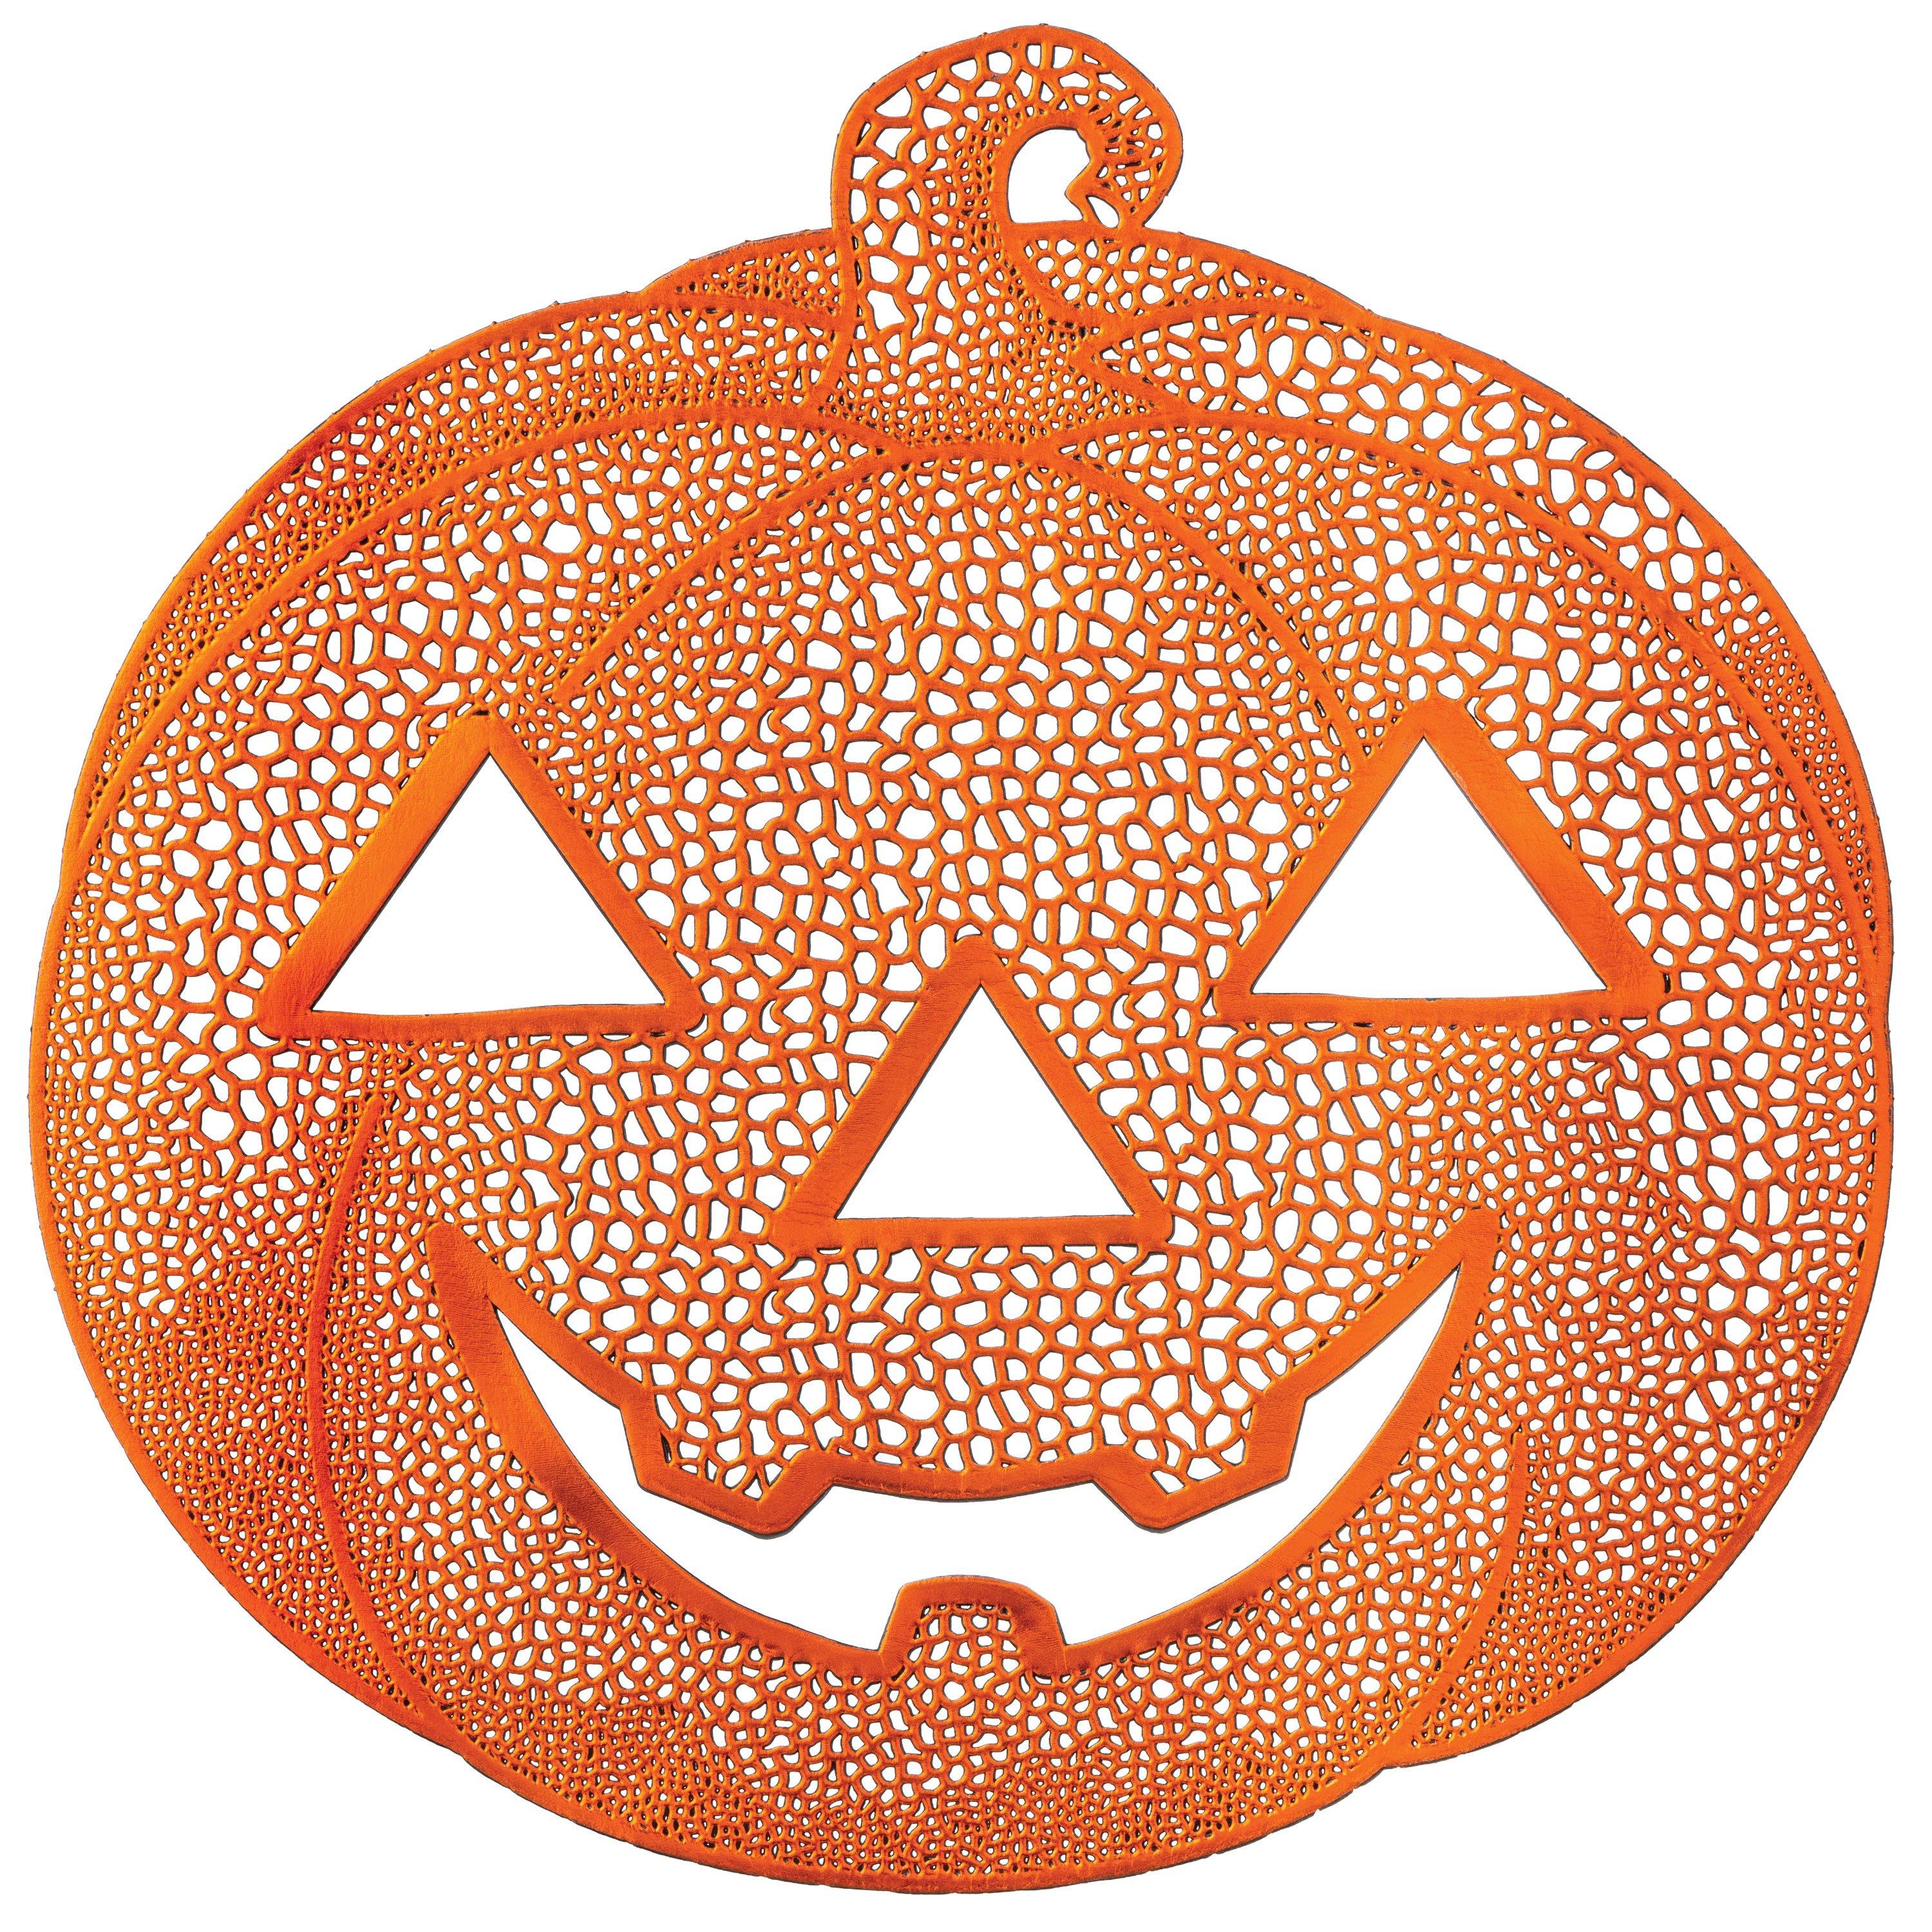 Plastic & Stainless Pumpkin Carving Kit with Paper Stencils, 13pc